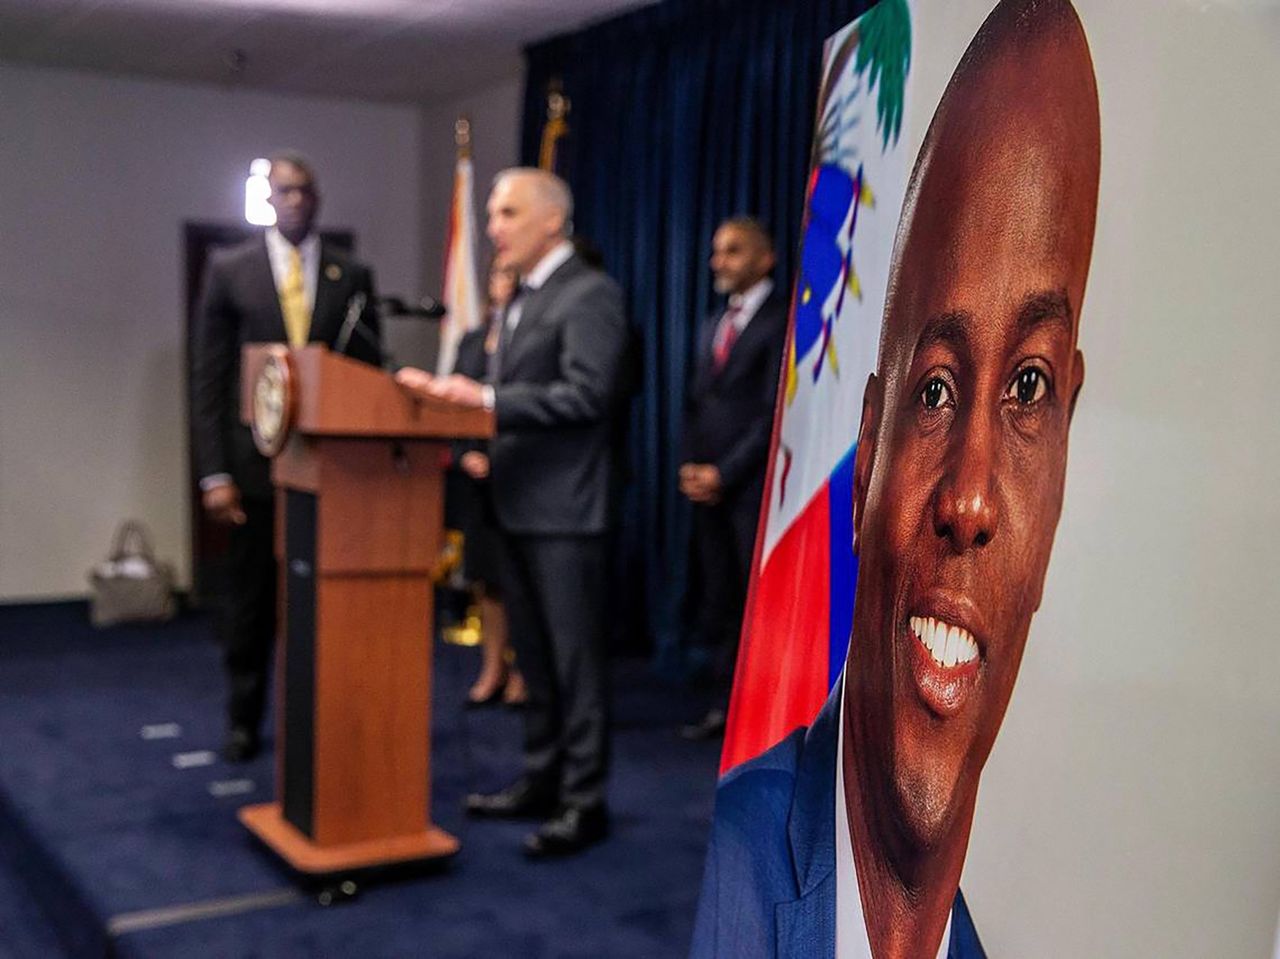 New information about the assassination of the Haitian president. His wife and former police chief indicted